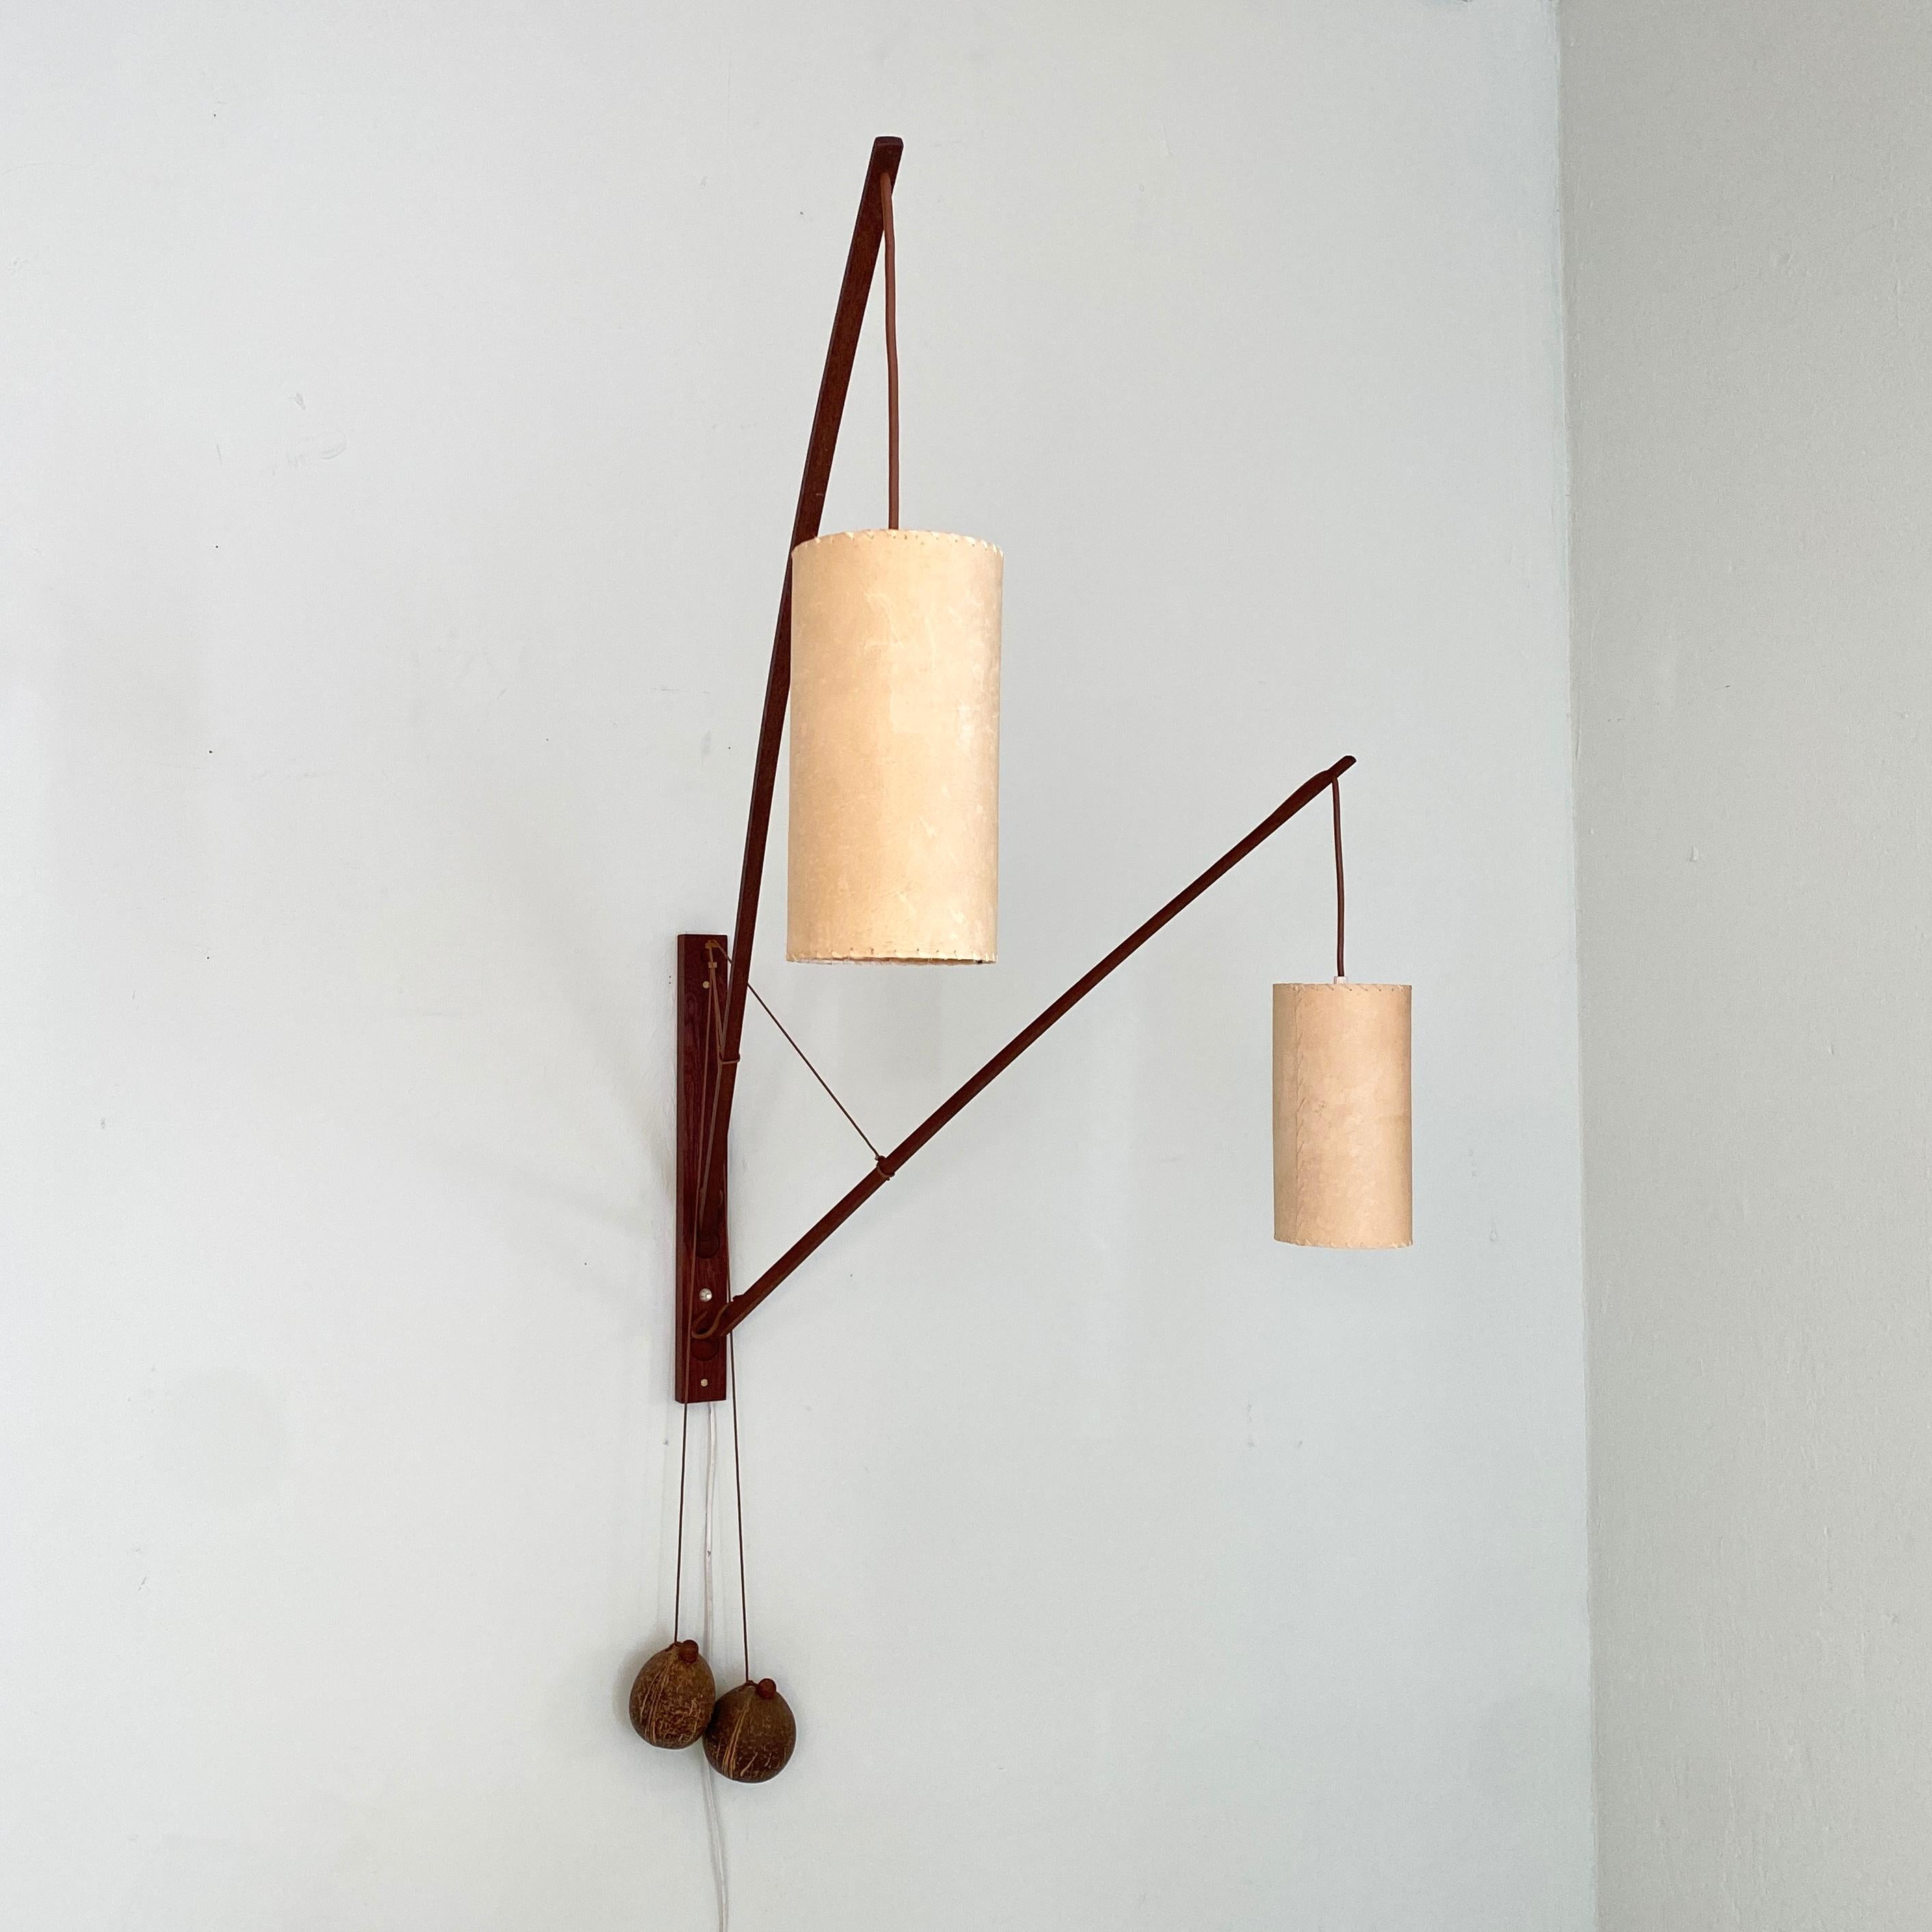 This large and super rare mid century solid teak double wall light by Rupprecht Skrip (Germany) was made in the 1950s. The wall lamp has a solid teak base, two ball-joints with two teak rods of different length, two coconut counterweights which